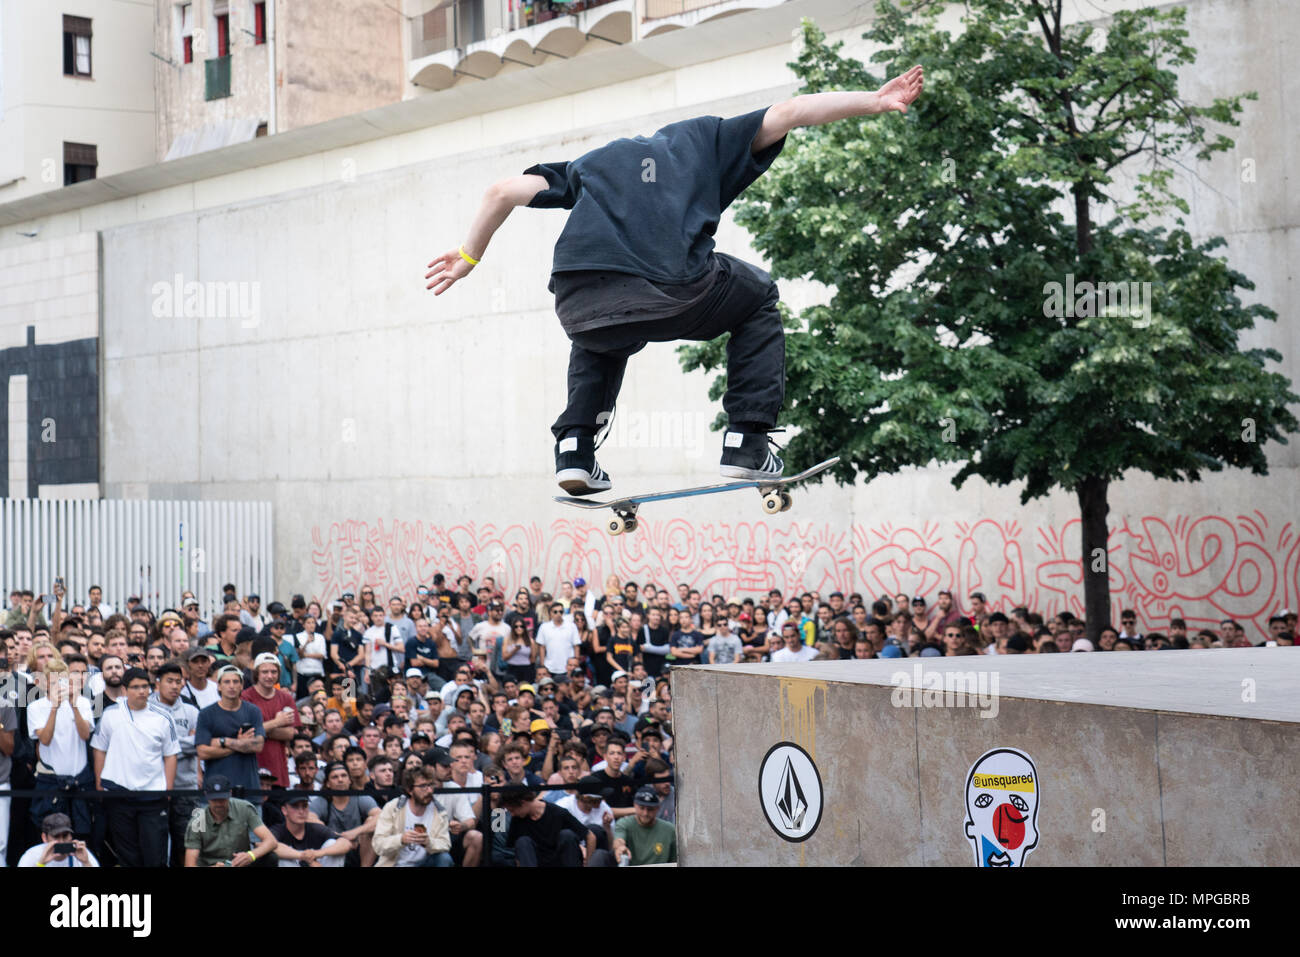 Pebish Vlek Eenzaamheid MACBA Museum, Barcelona, Catalonia, Spain, 23 May 2018 Thousands of  skateboard enthusiasts turned up to watch the 'Back To The 4' skateboard  competition at MACBA Museum in Barcelona. Skateboarding stars performed  dangerous